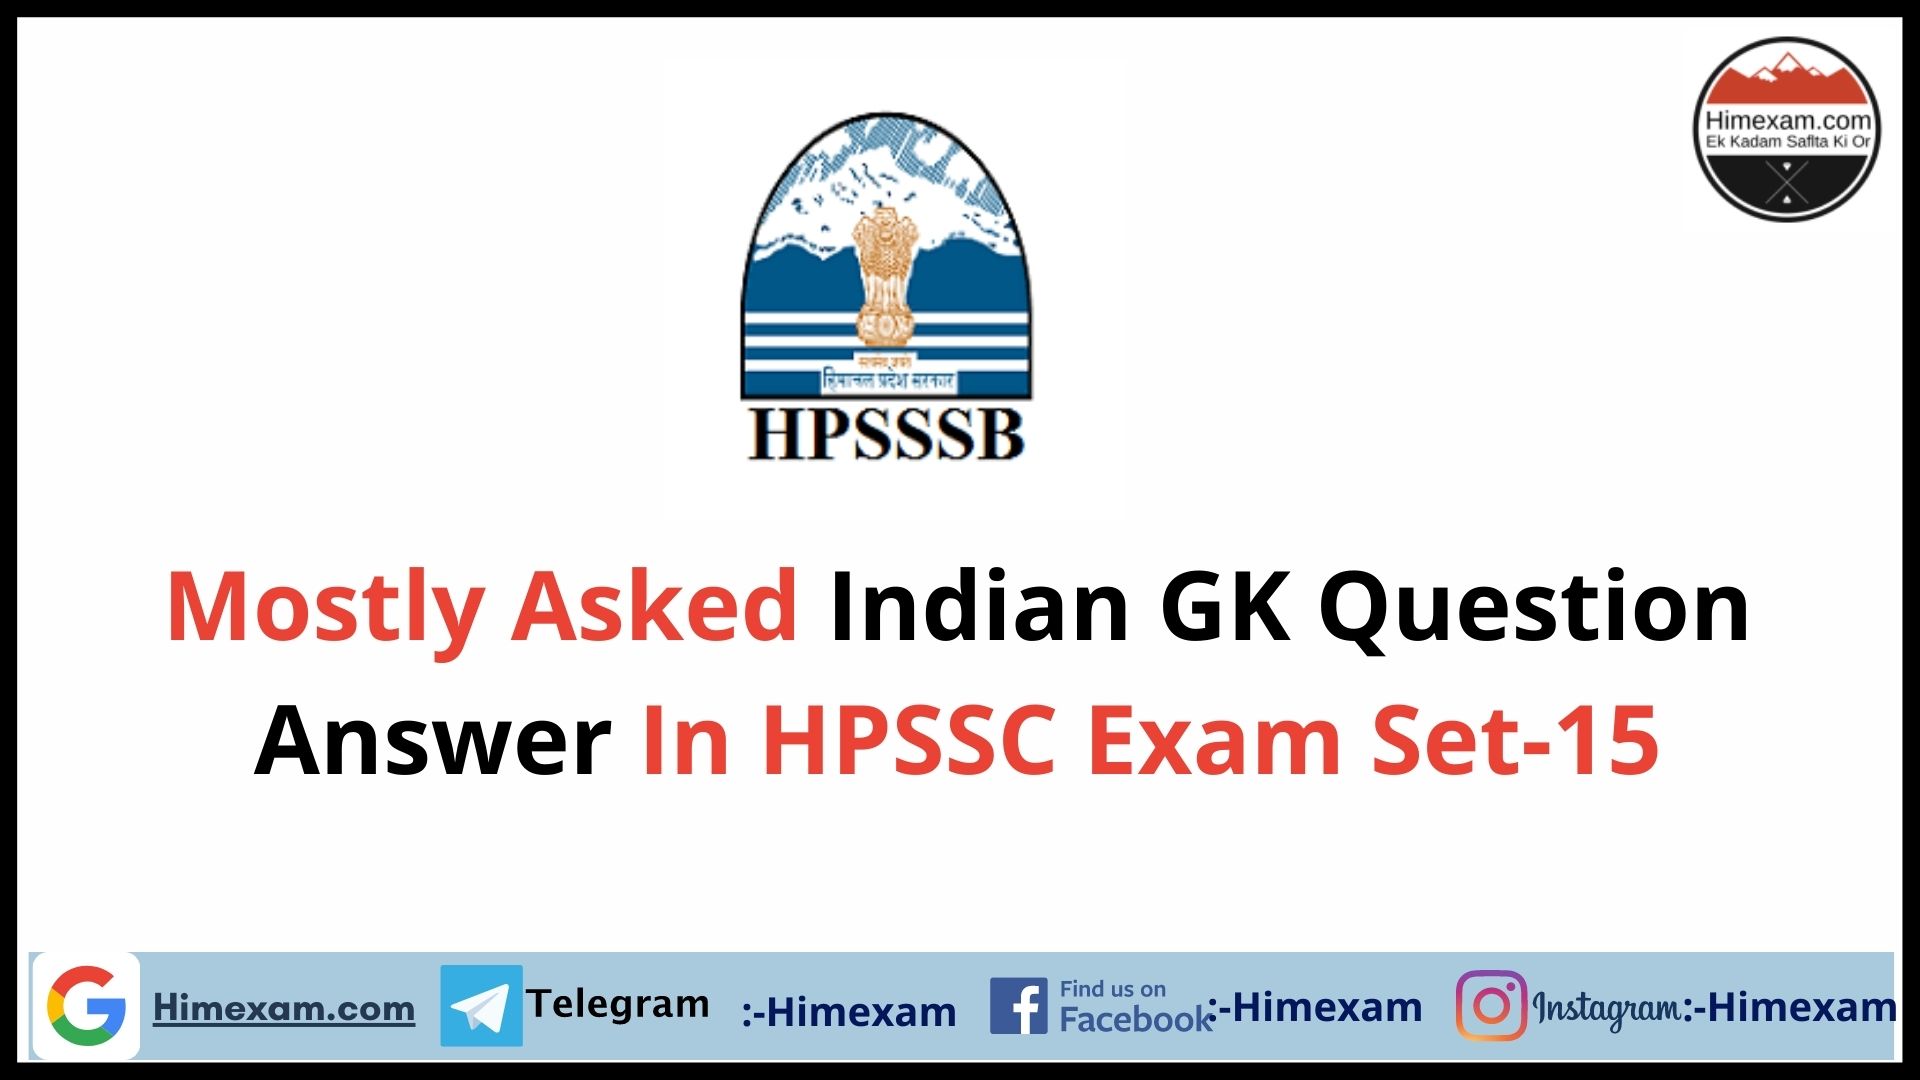 Mostly Asked Indian GK Question Answer In HPSSC Exam Set-15